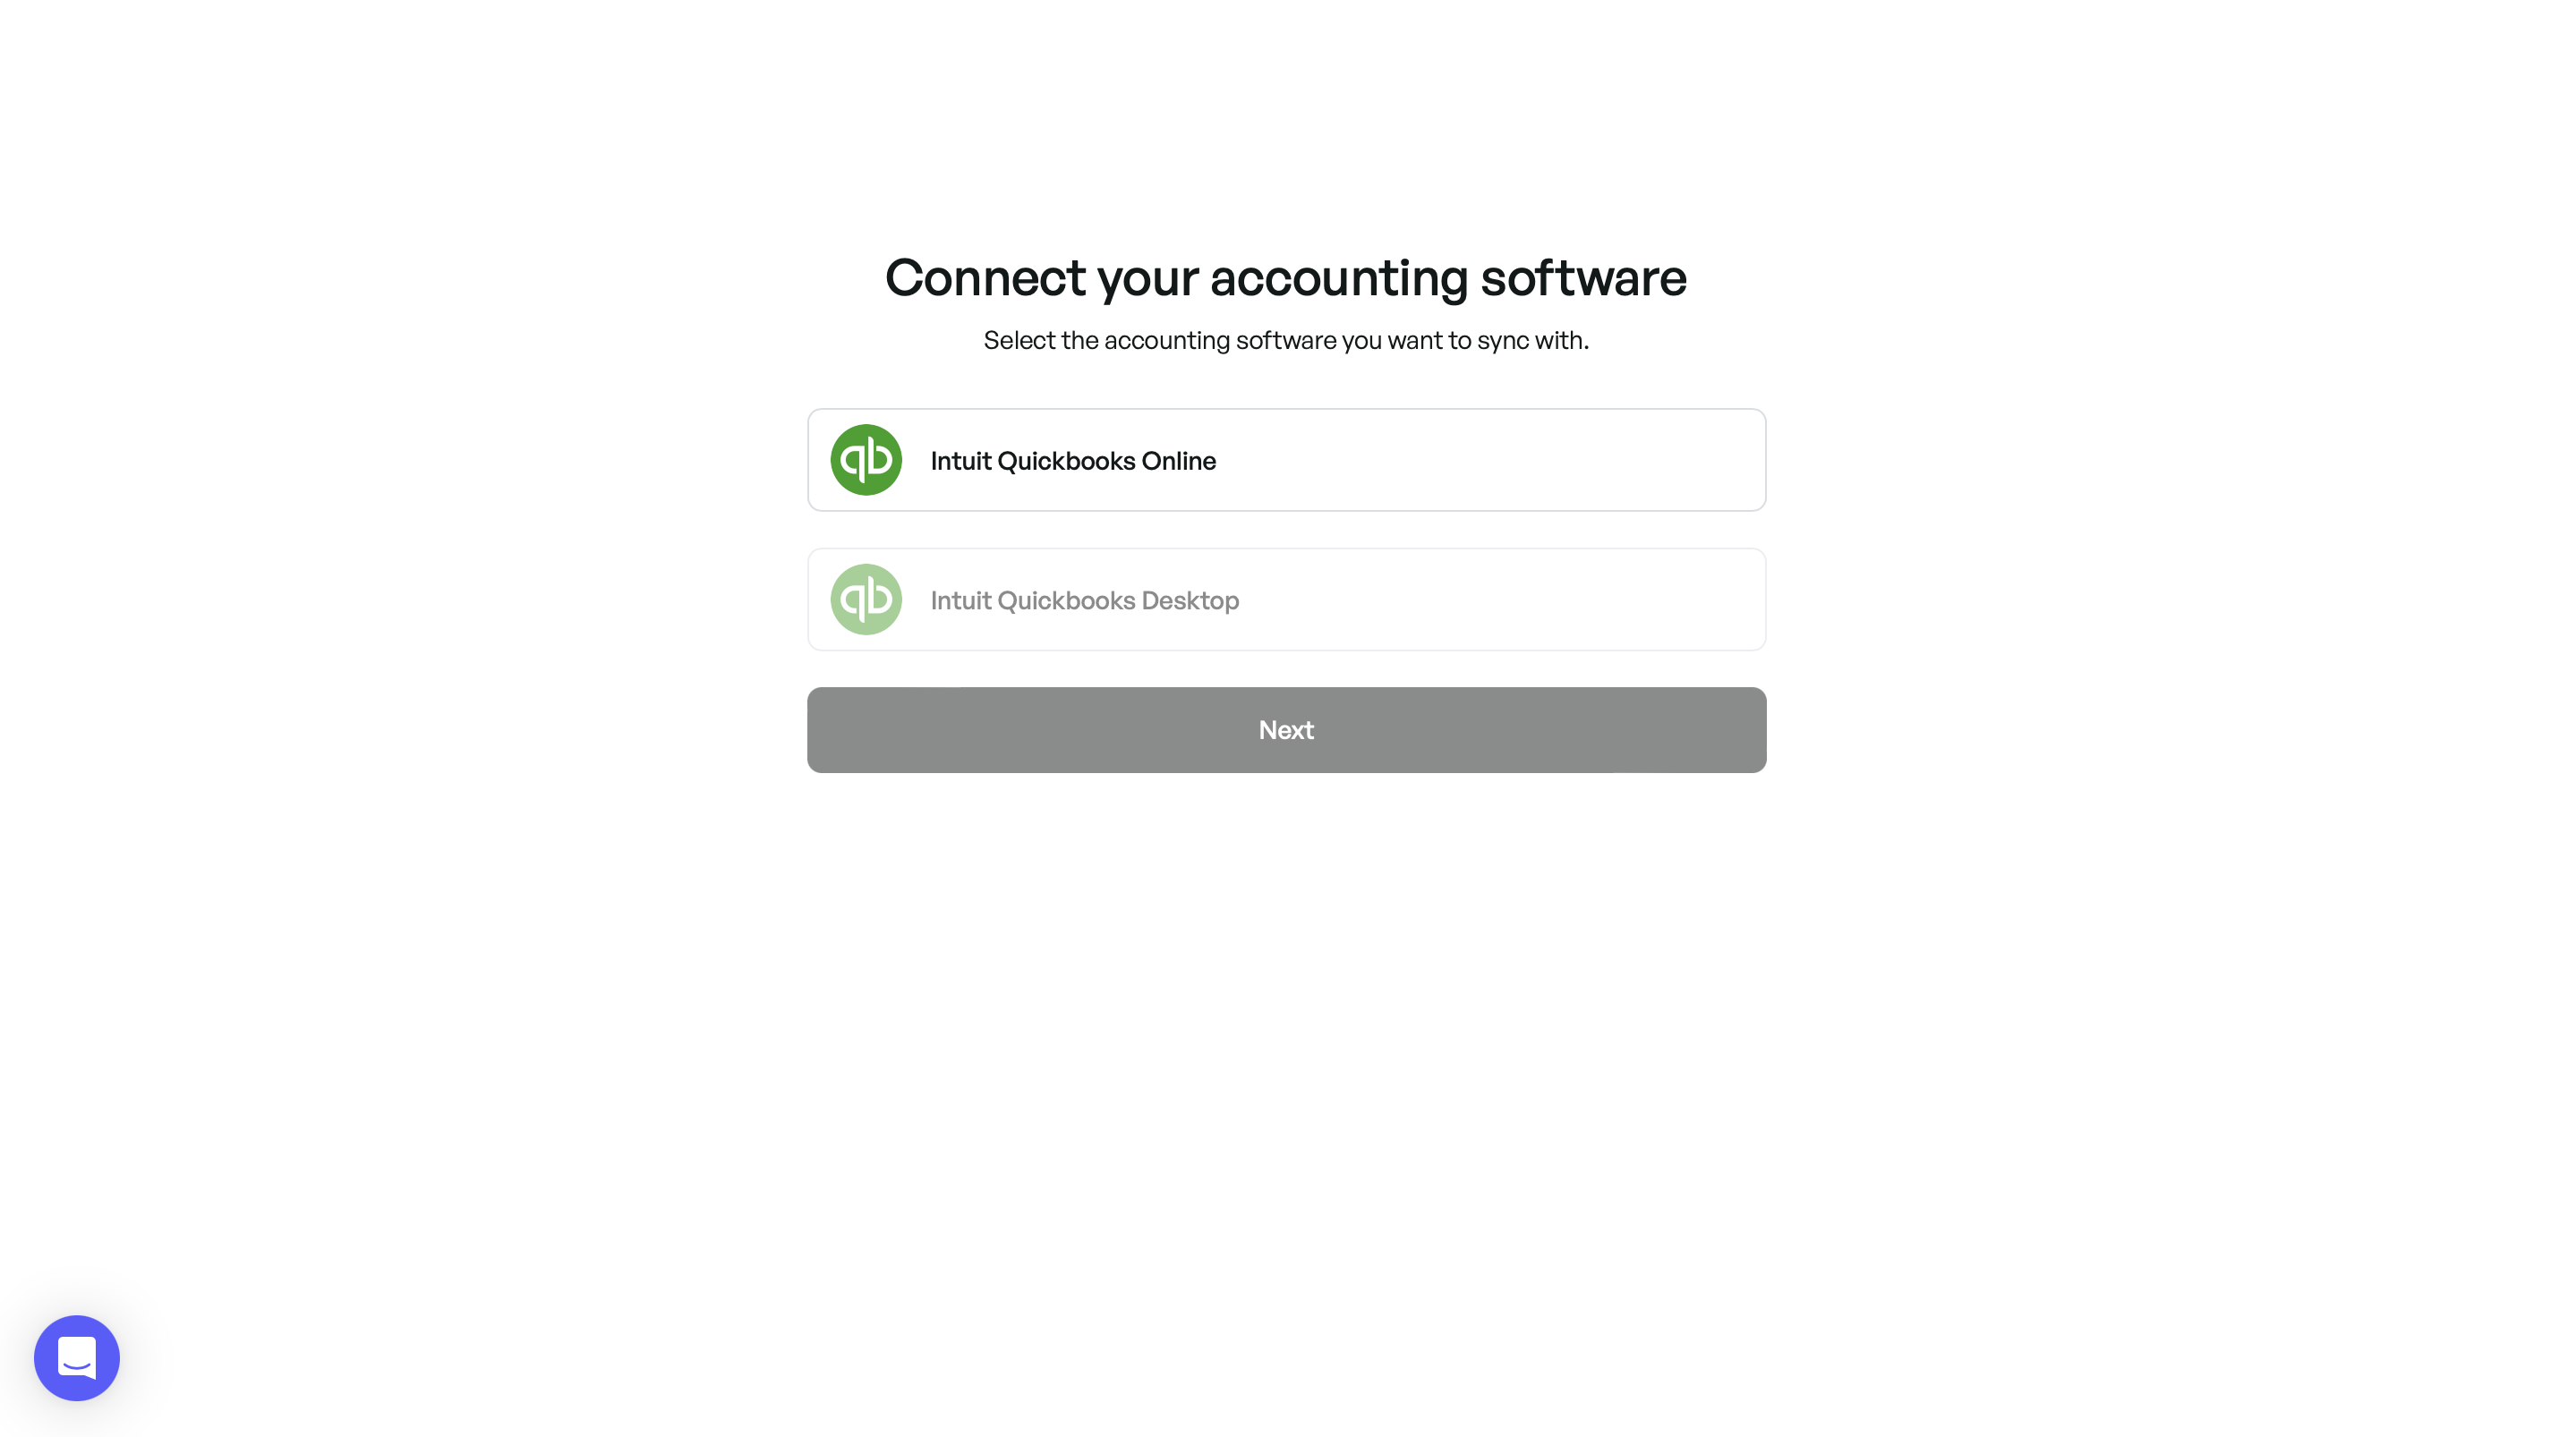 Connect your accounting system to import and pay bills in seconds.